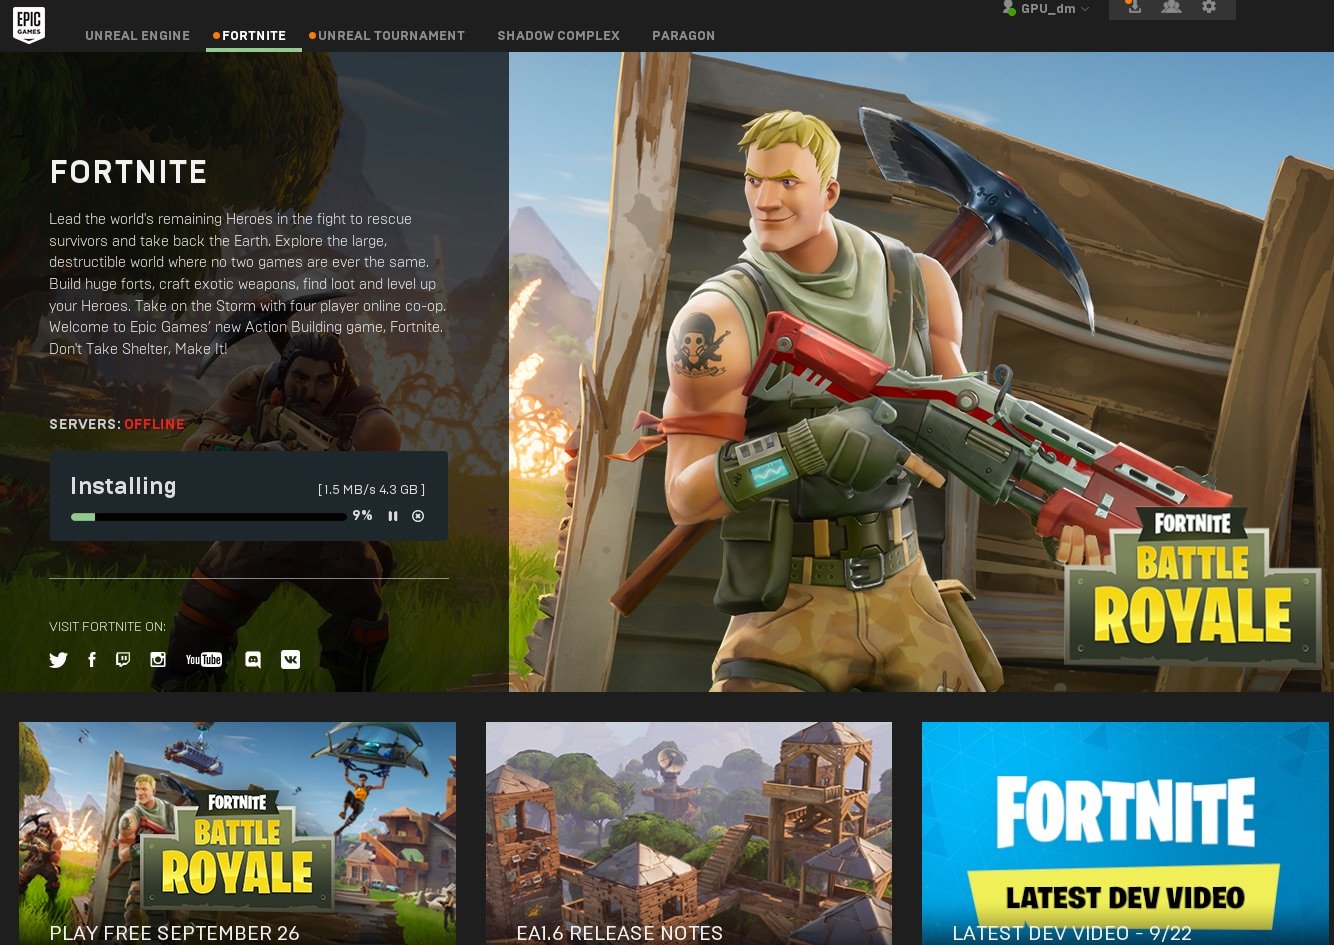 Squads Launches Today For Free To Play Battle Royale Fortnite - squads launches today for free to play battle royale fortnite team up